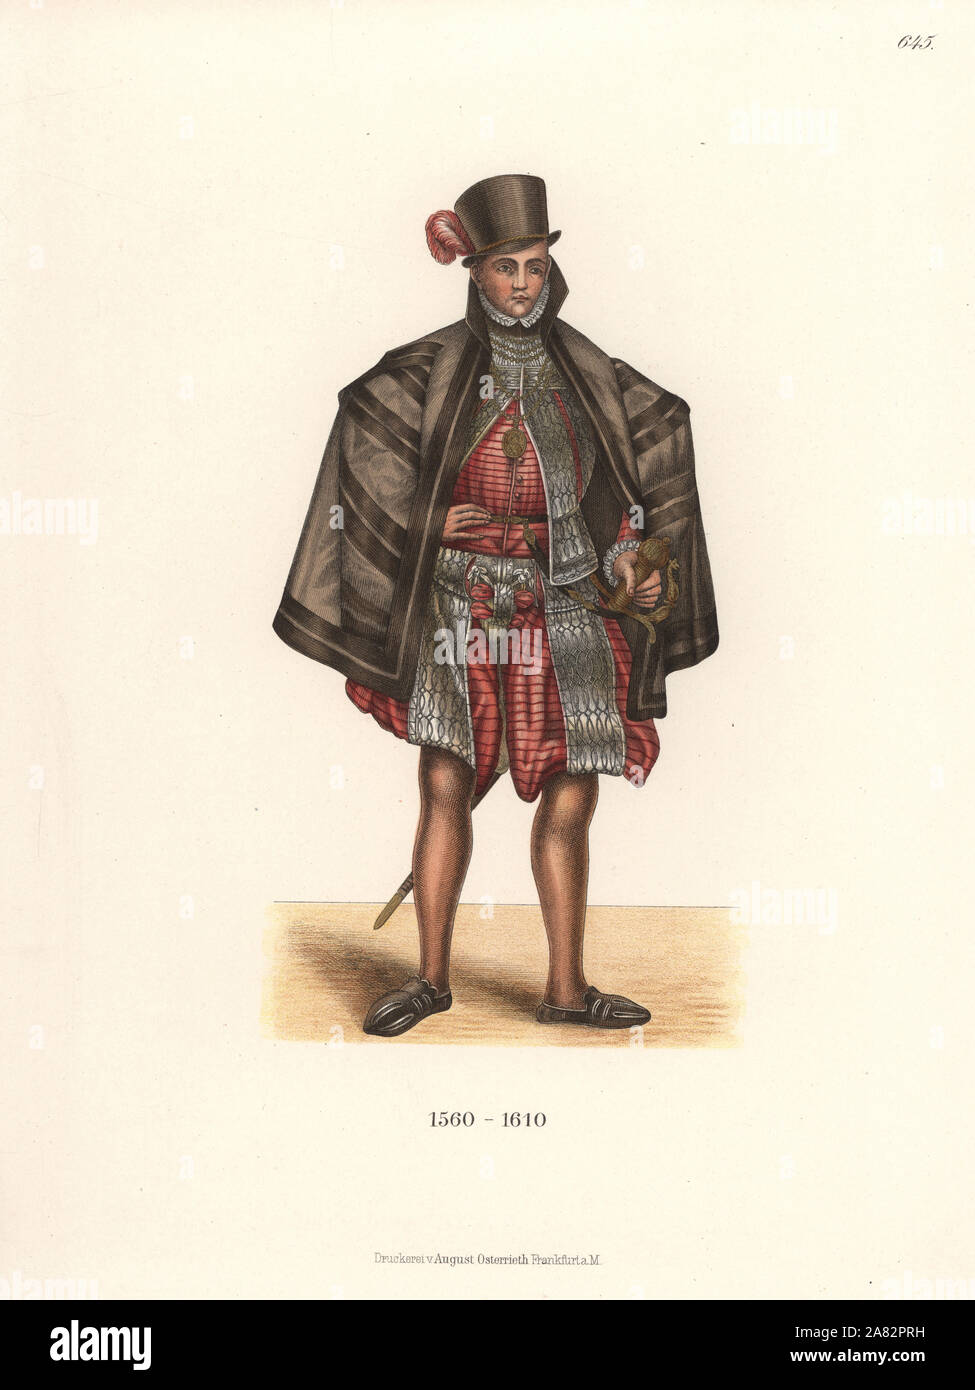 Young Furst or nobleman in his student days, wearing precious hat, doublet, hose and cape. From a lifesize oil painting in Nuremburg Museum. Chromolithograph from Hefner-Alteneck's Costumes, Artworks and Appliances from the Middle Ages to the 17th Century, Frankfurt, 1889. Dr. Jakob Heinrich von Hefner-Alteneck (1811-1903) was a German museum curator, archaeologist, art historian, illustrator and etcher. Stock Photo